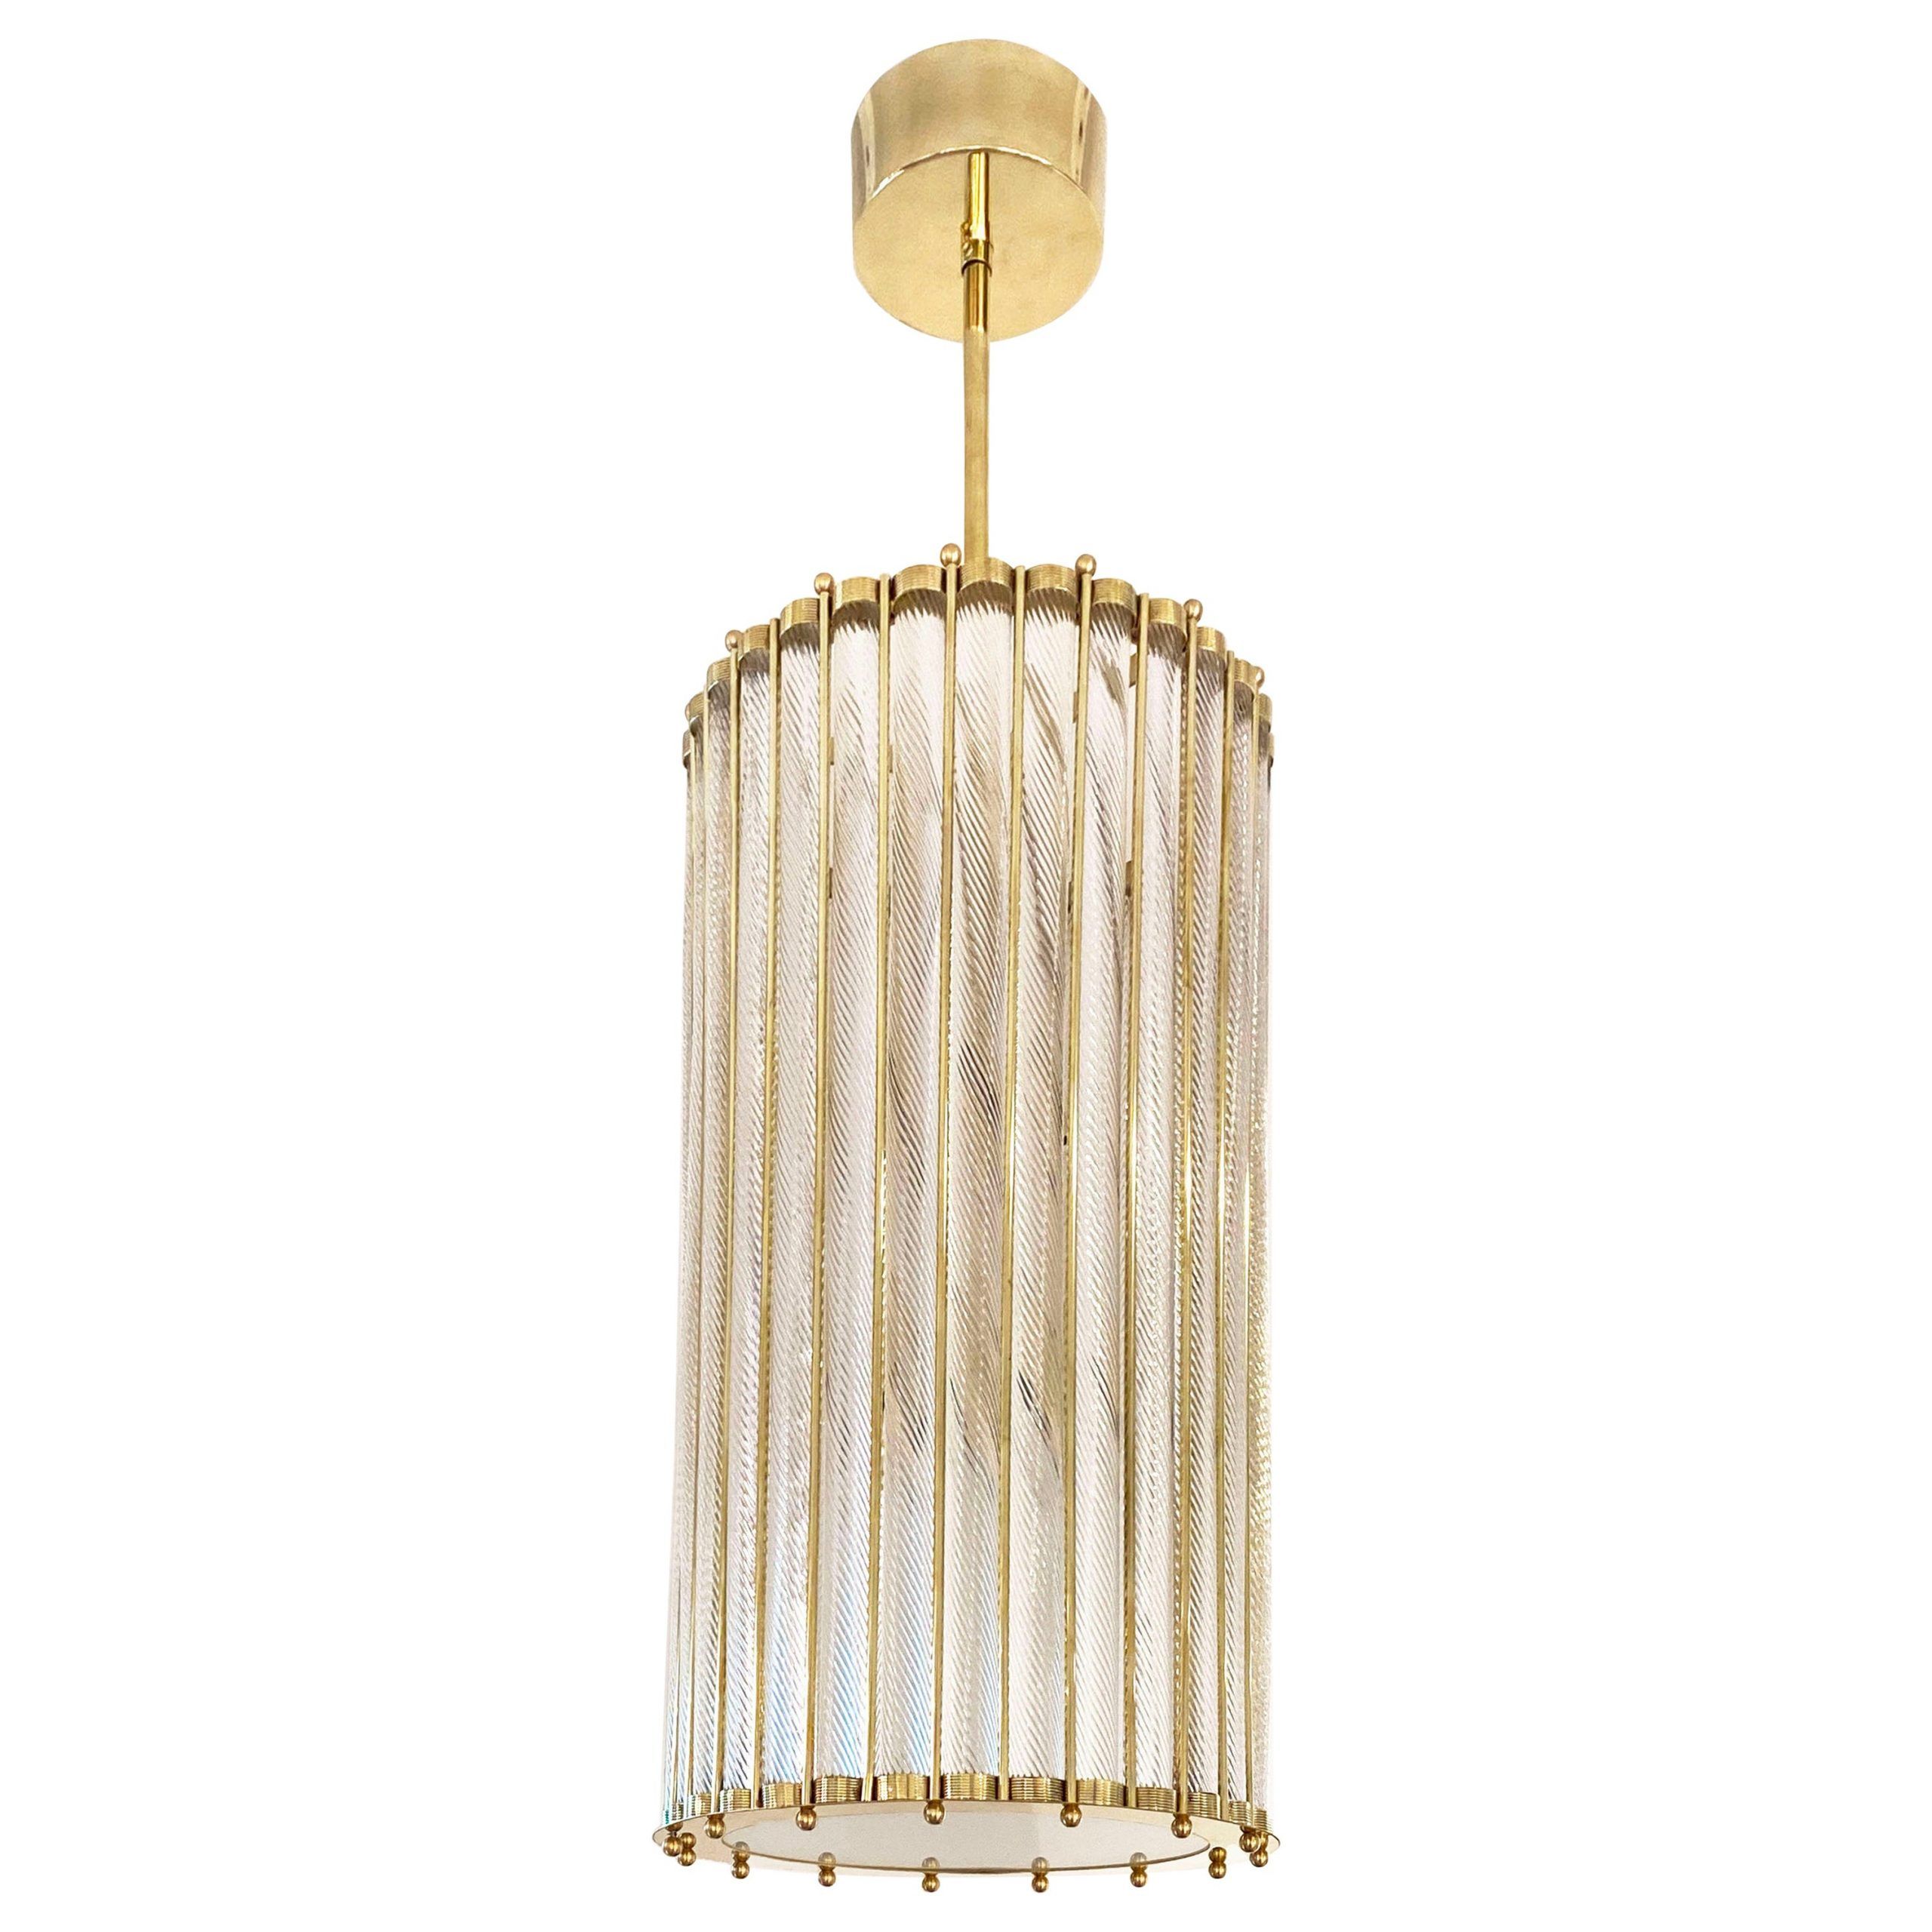 Italian Crystal Lantern Chandeliers Regarding Well Known Italian Tall Crystal Twisted Murano Glass Brass Lantern Pendant / Chandelier  For Sale At 1stdibs (View 6 of 10)